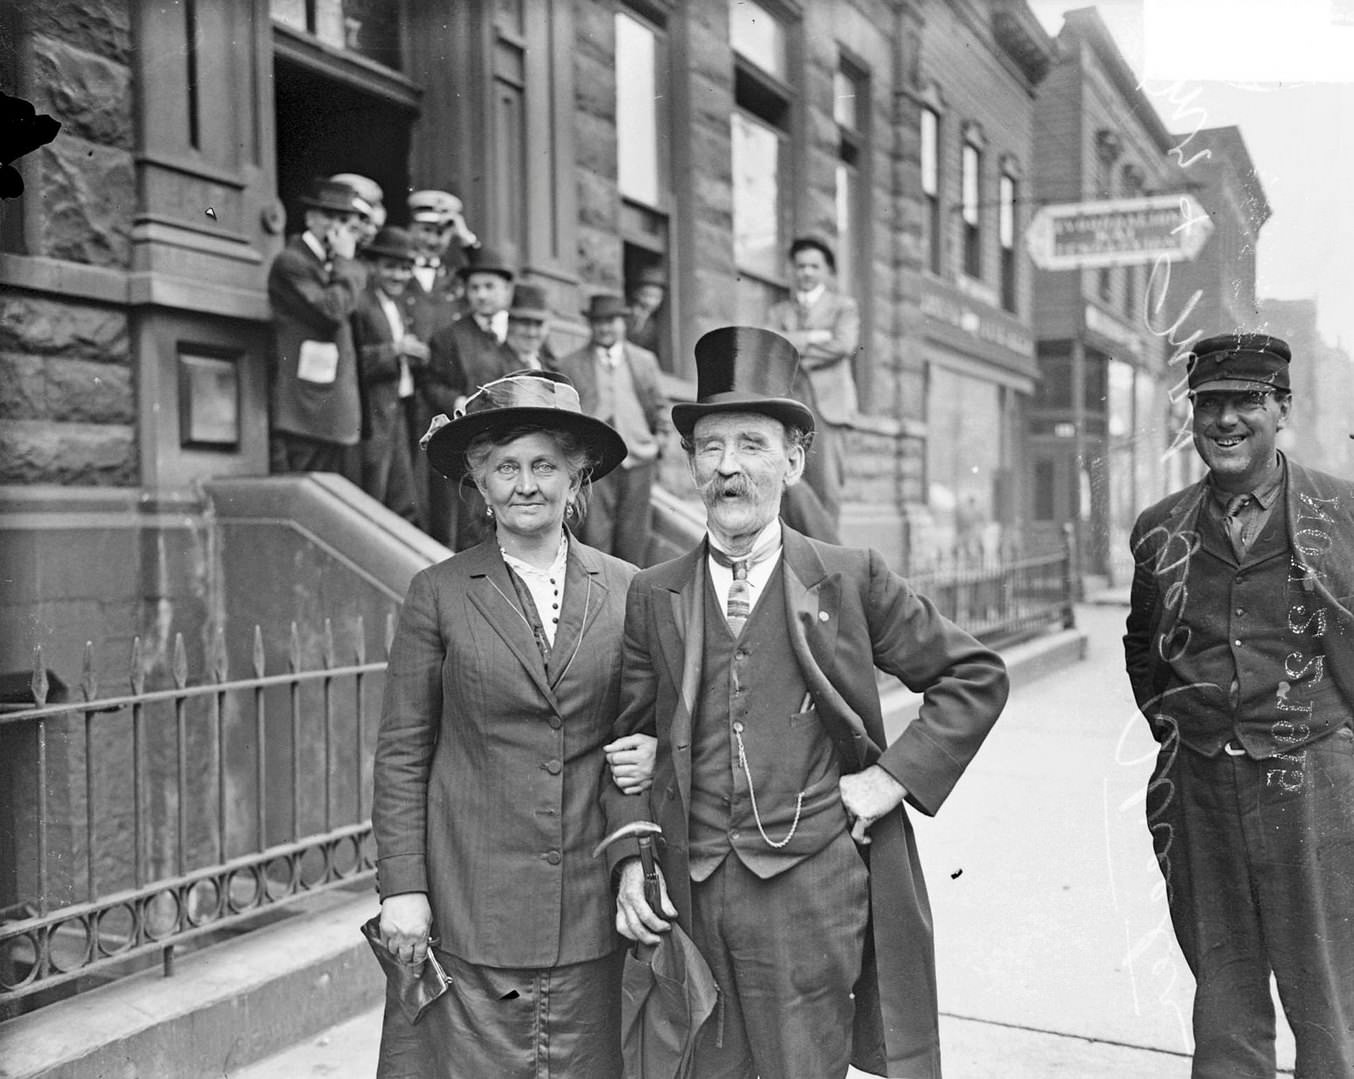 Captain George Wellington Streeter and his wife, Elma, standing on a sidewalk, Chicago, Illinois, October 13, 1915.